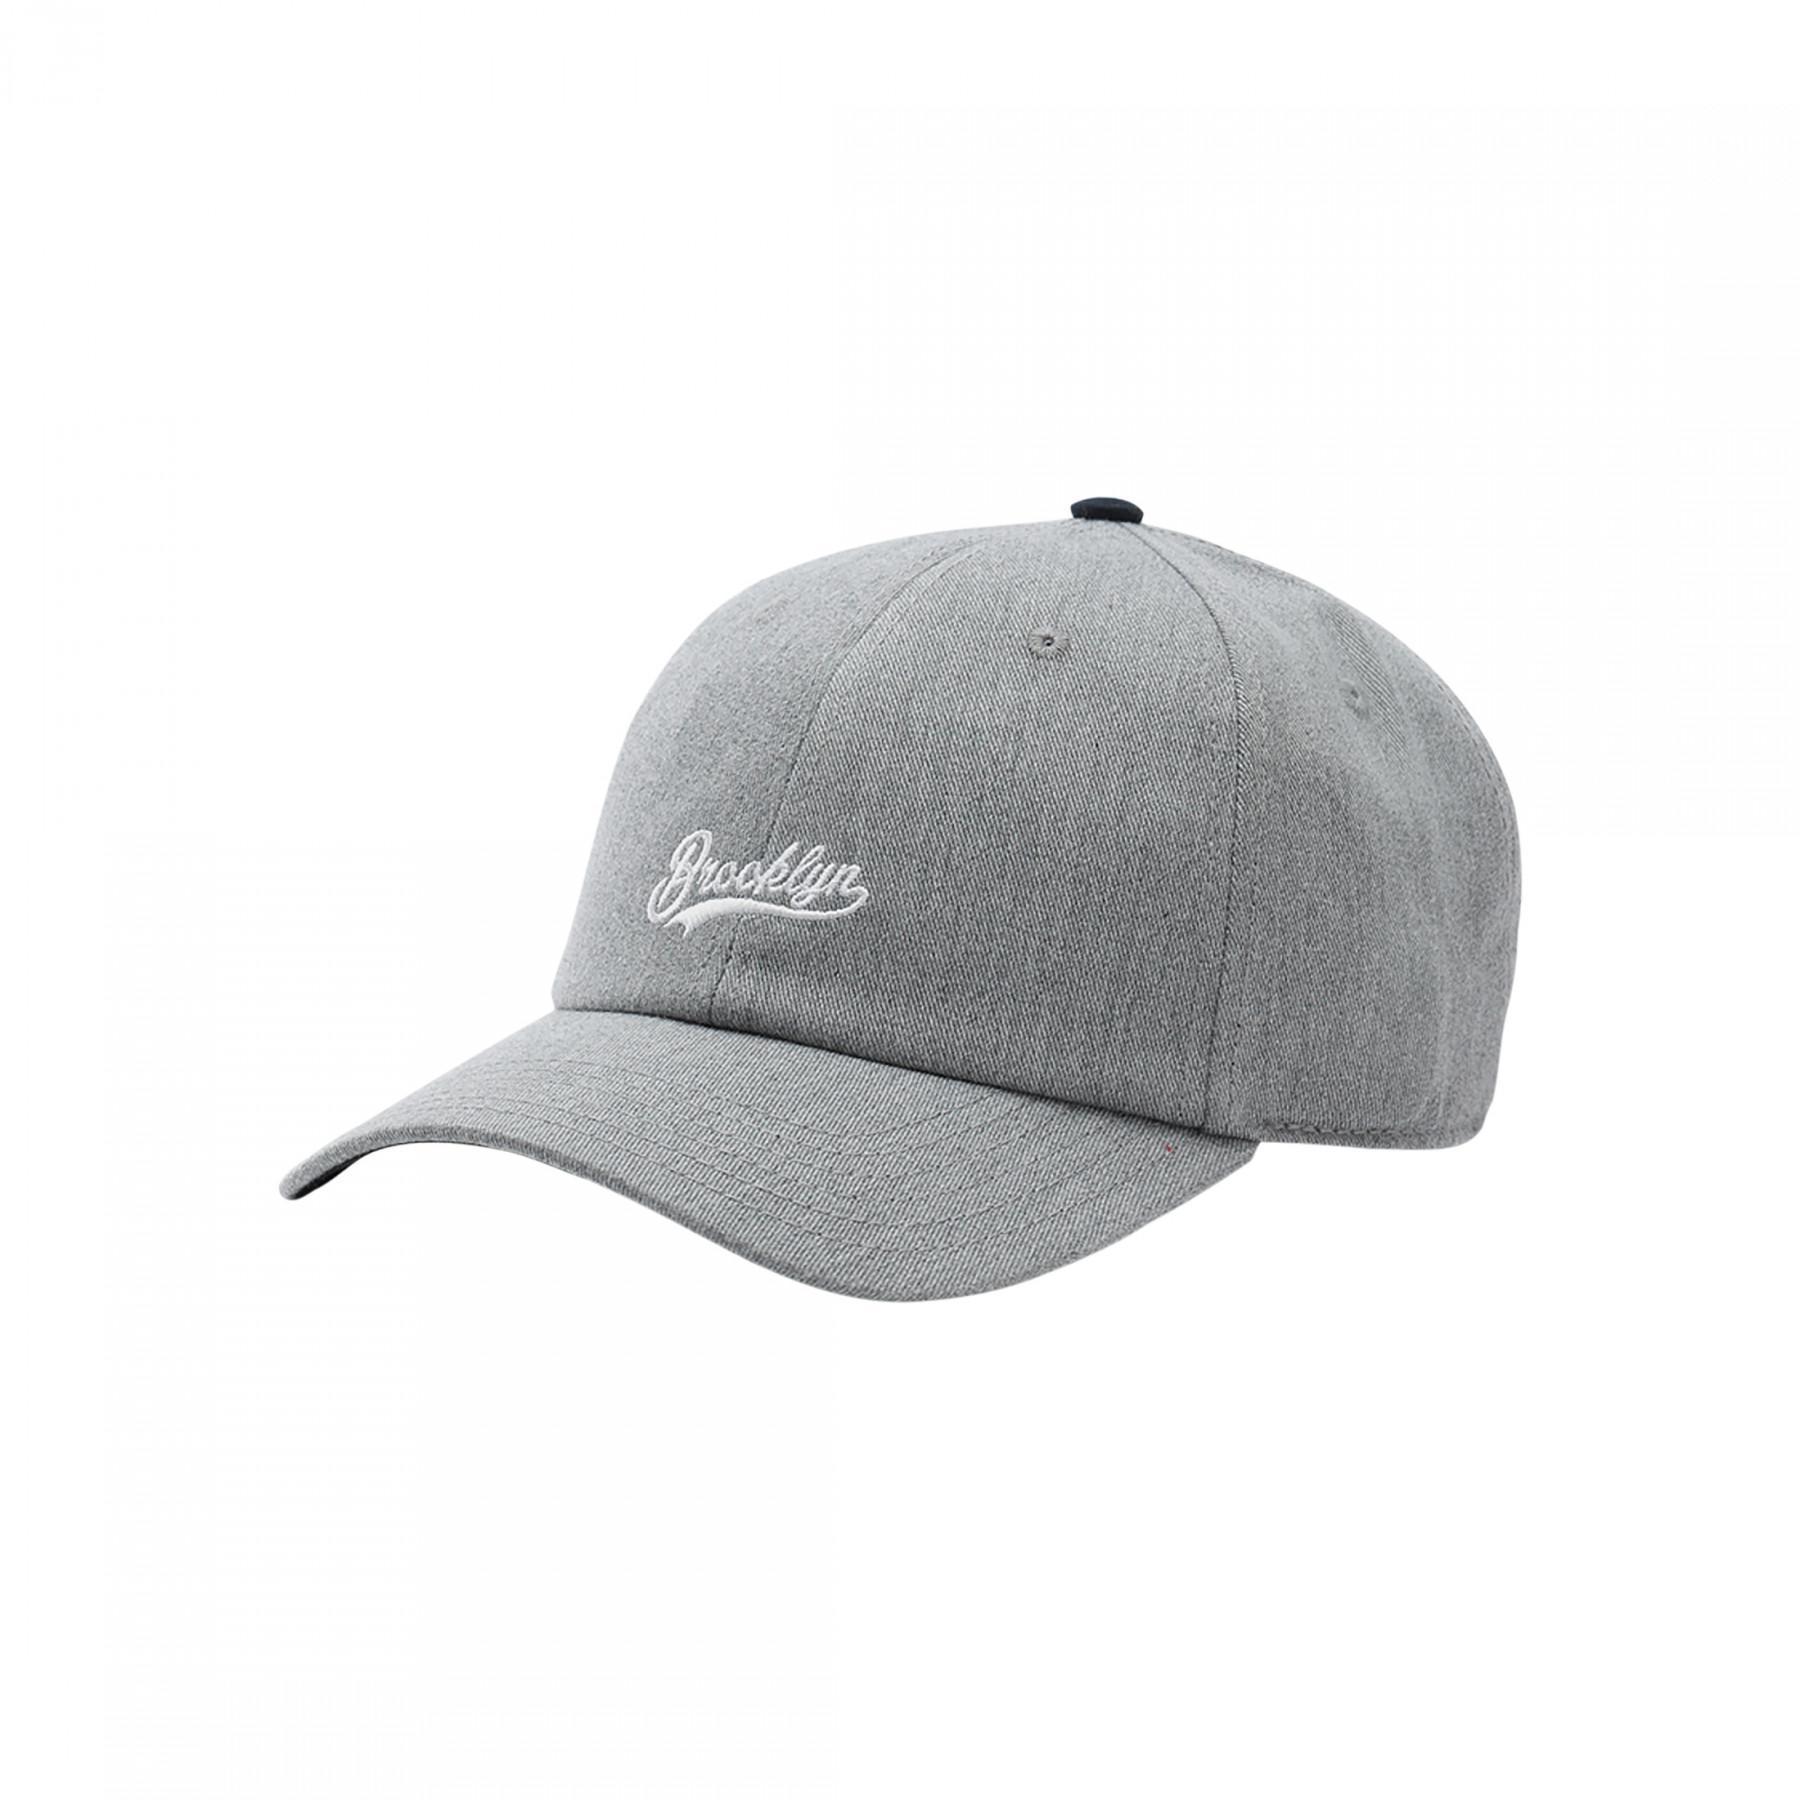 Cap Cayler & Sons cl bk fastball curved